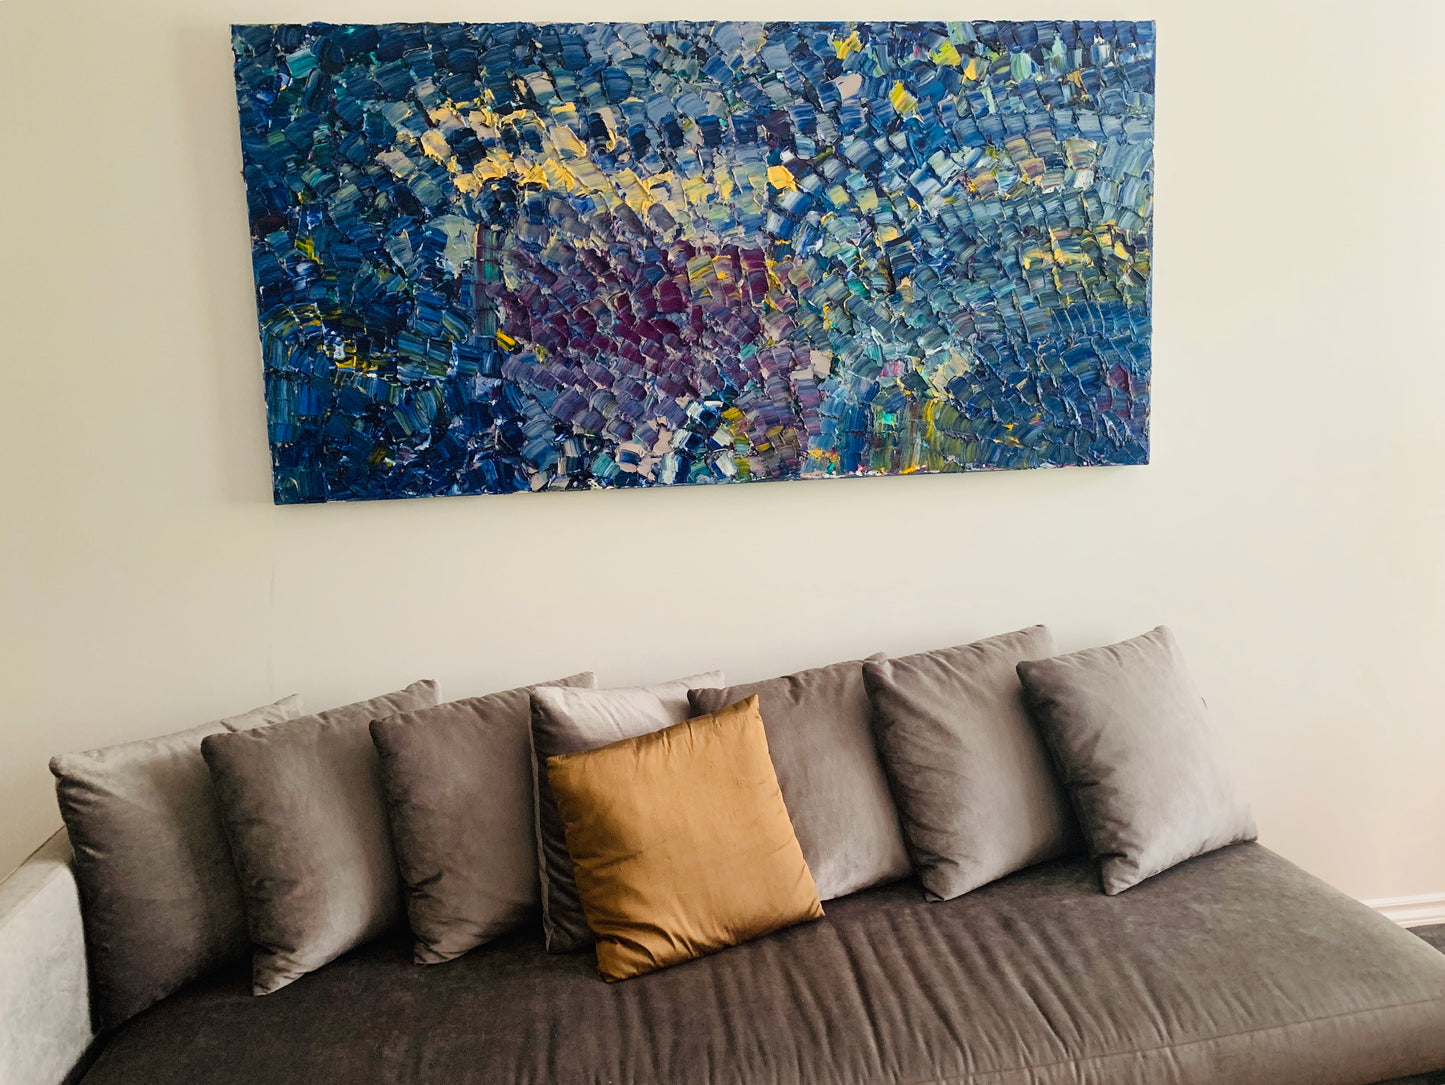 Sky, 36"x72" Oil On Canvas, Sold 2018